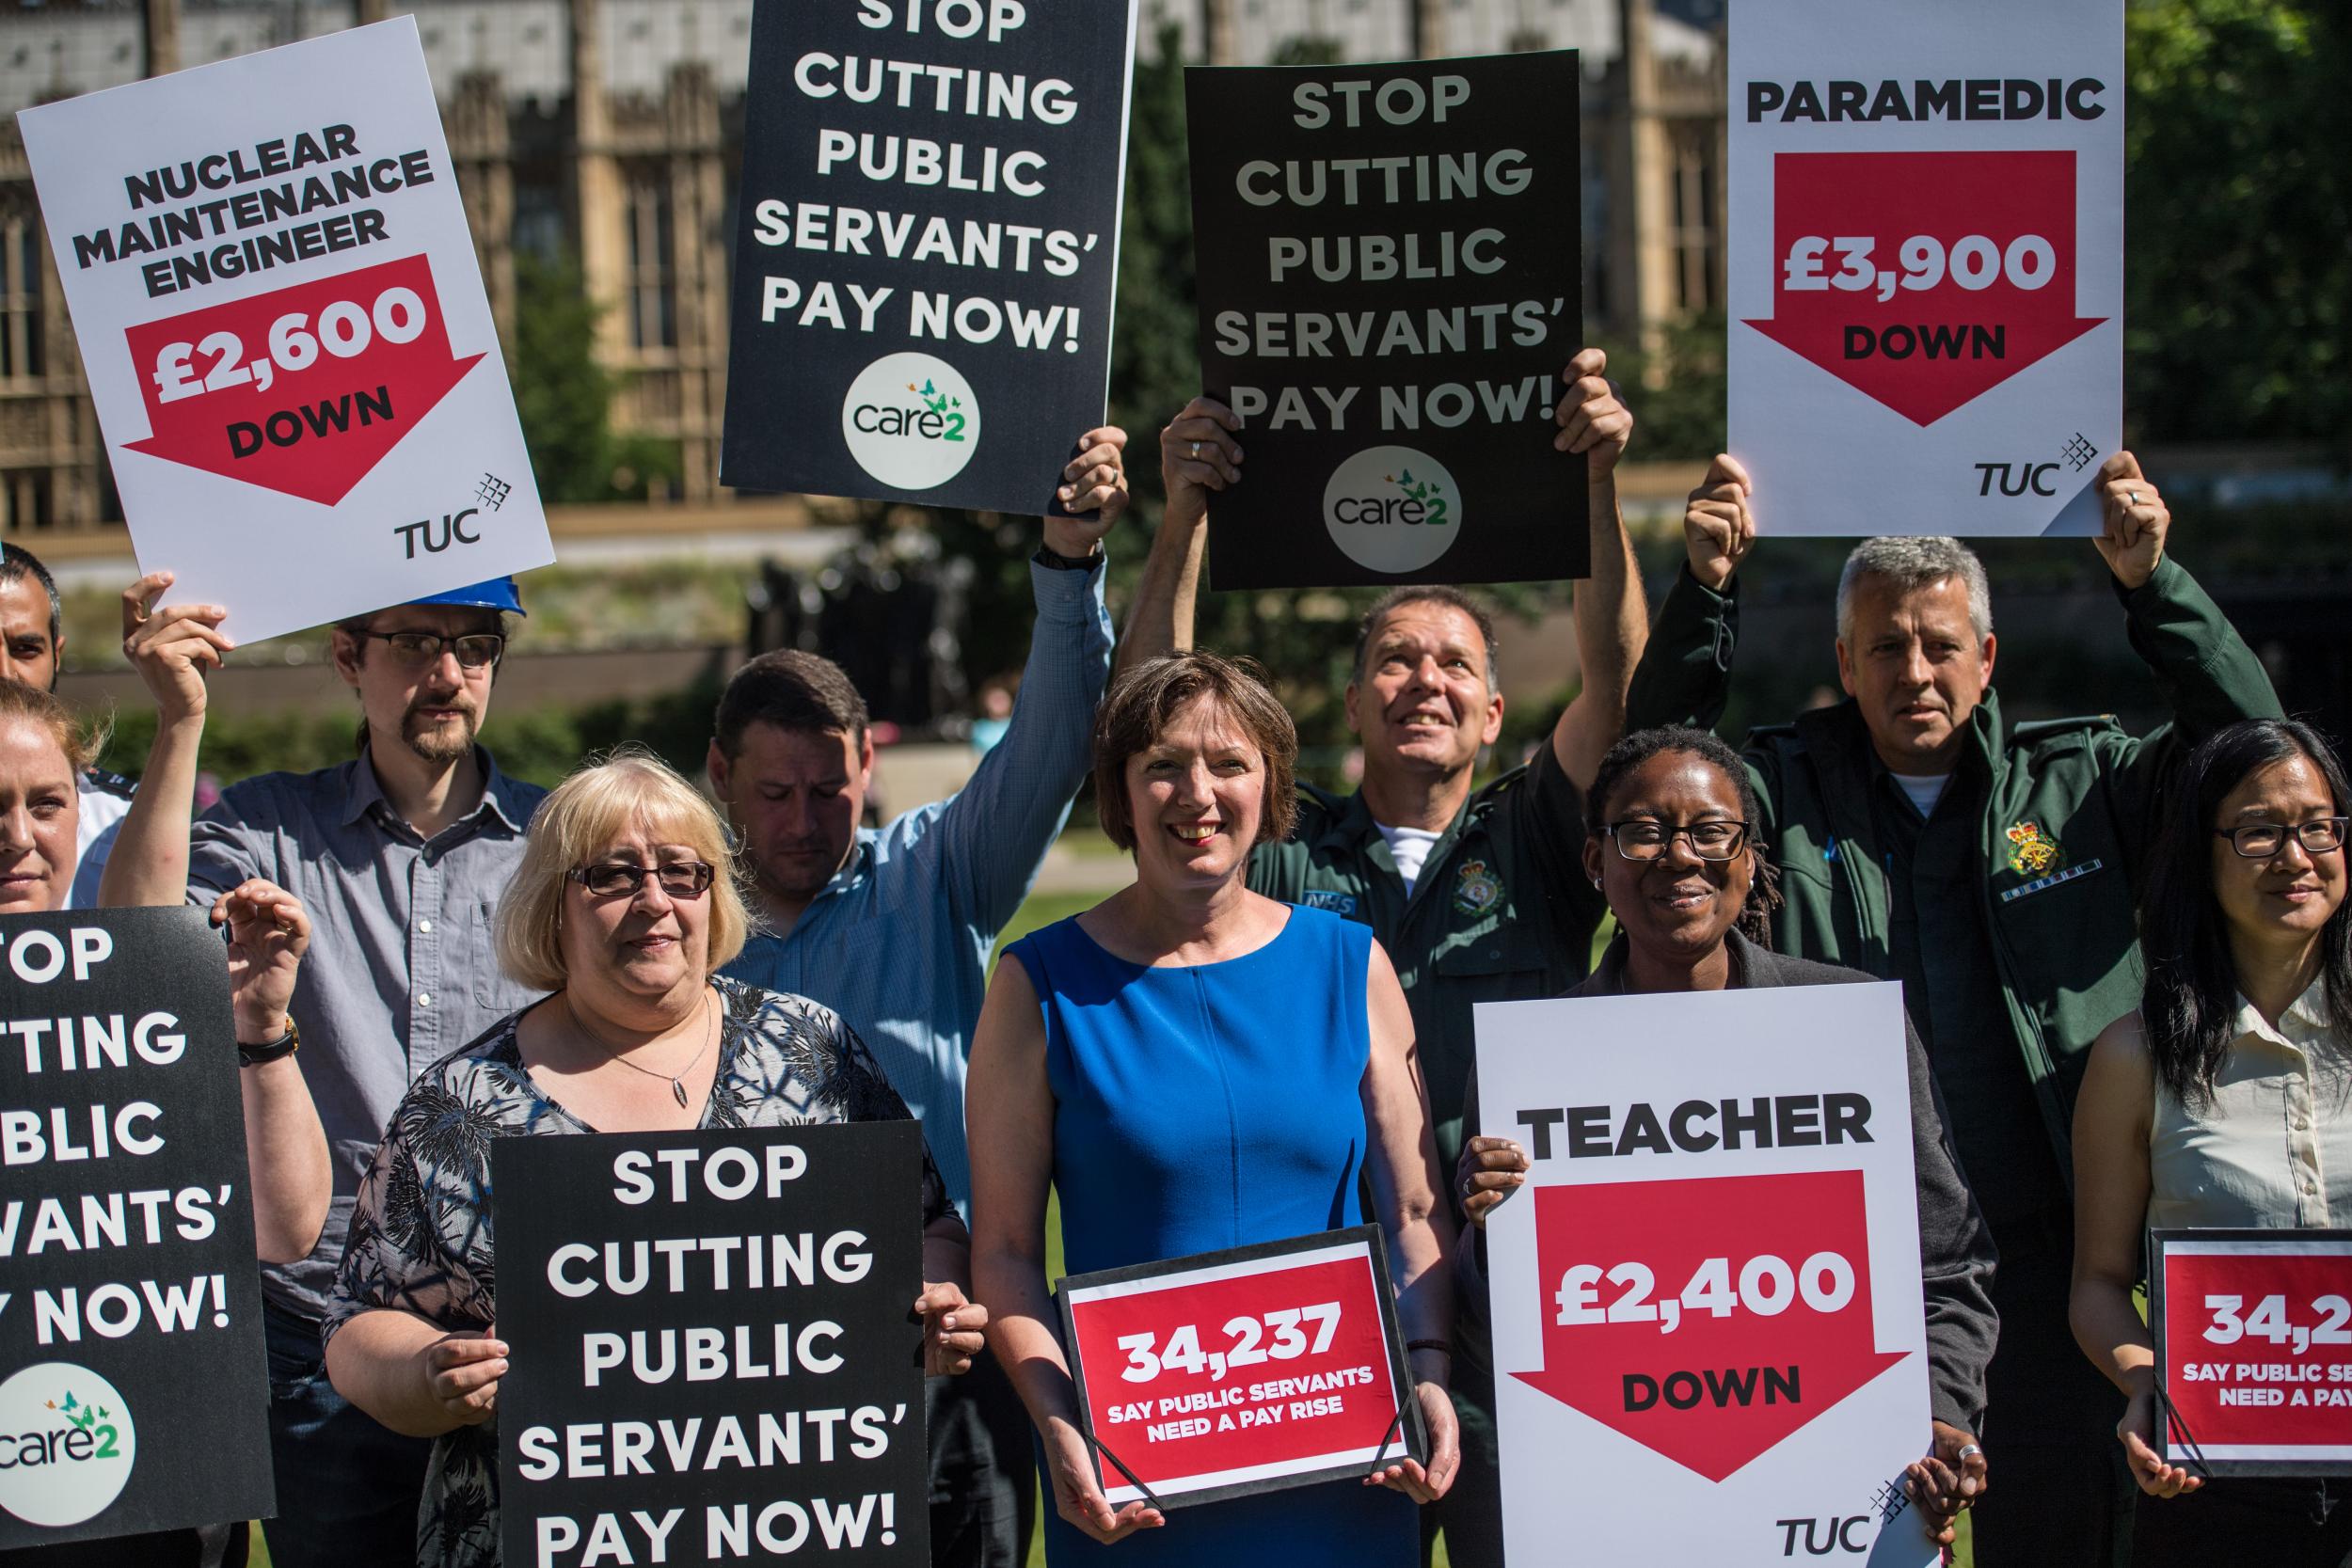 Research by Unison suggests public sector staff are working more than 40 million hours of unpaid overtime a year as workers face 'intolerable' pressures due to cutbacks